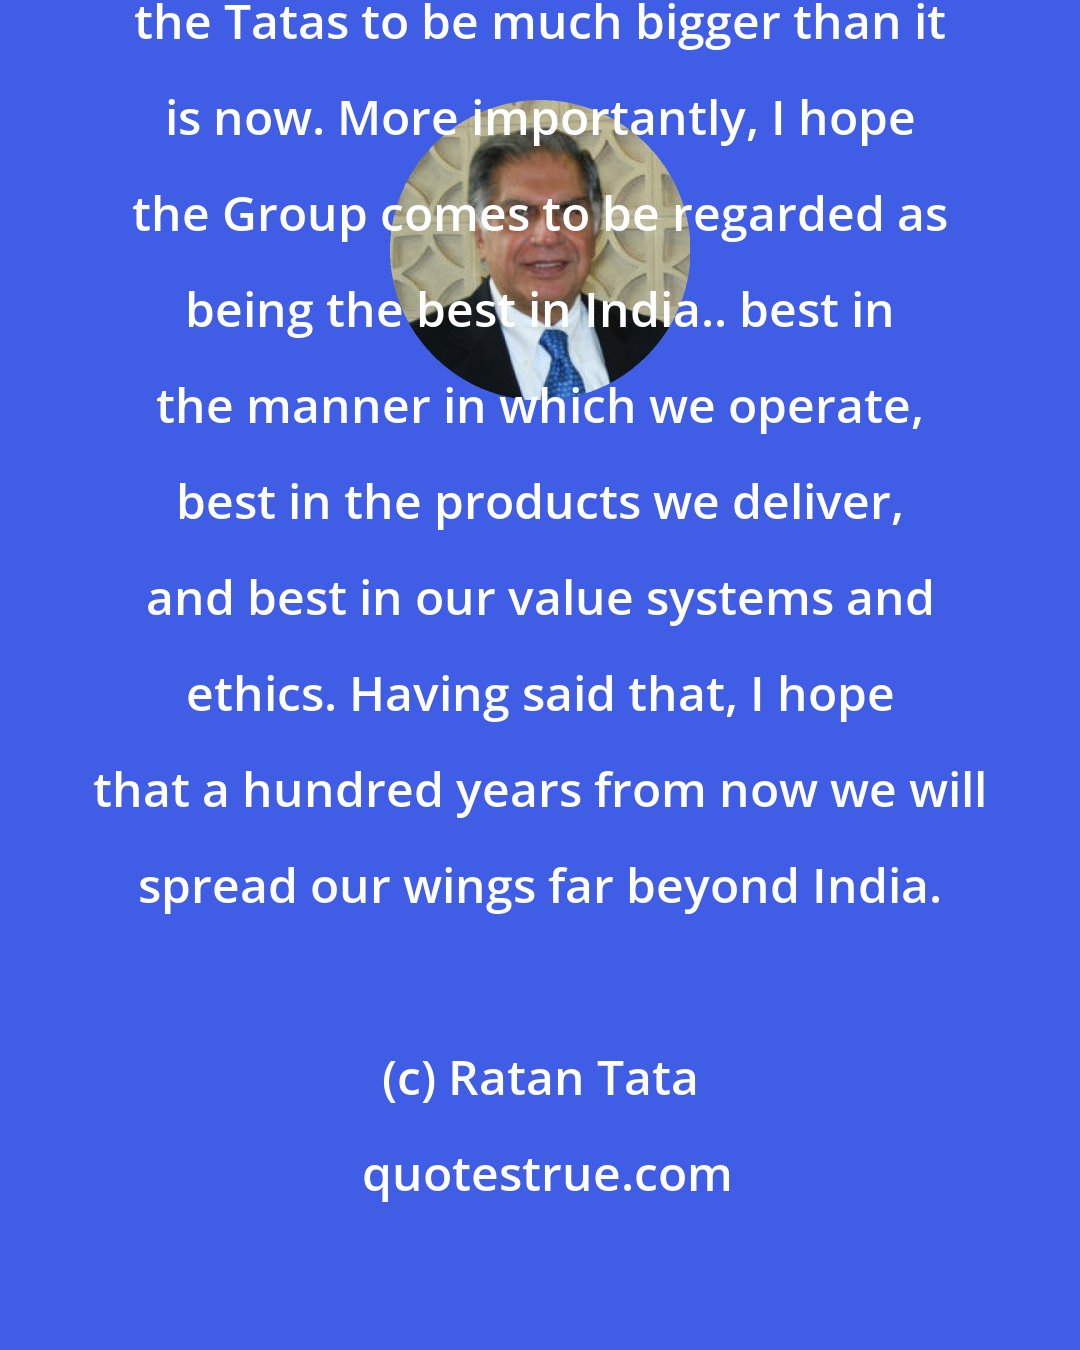 Ratan Tata: One hundred years from now, I expect the Tatas to be much bigger than it is now. More importantly, I hope the Group comes to be regarded as being the best in India.. best in the manner in which we operate, best in the products we deliver, and best in our value systems and ethics. Having said that, I hope that a hundred years from now we will spread our wings far beyond India.